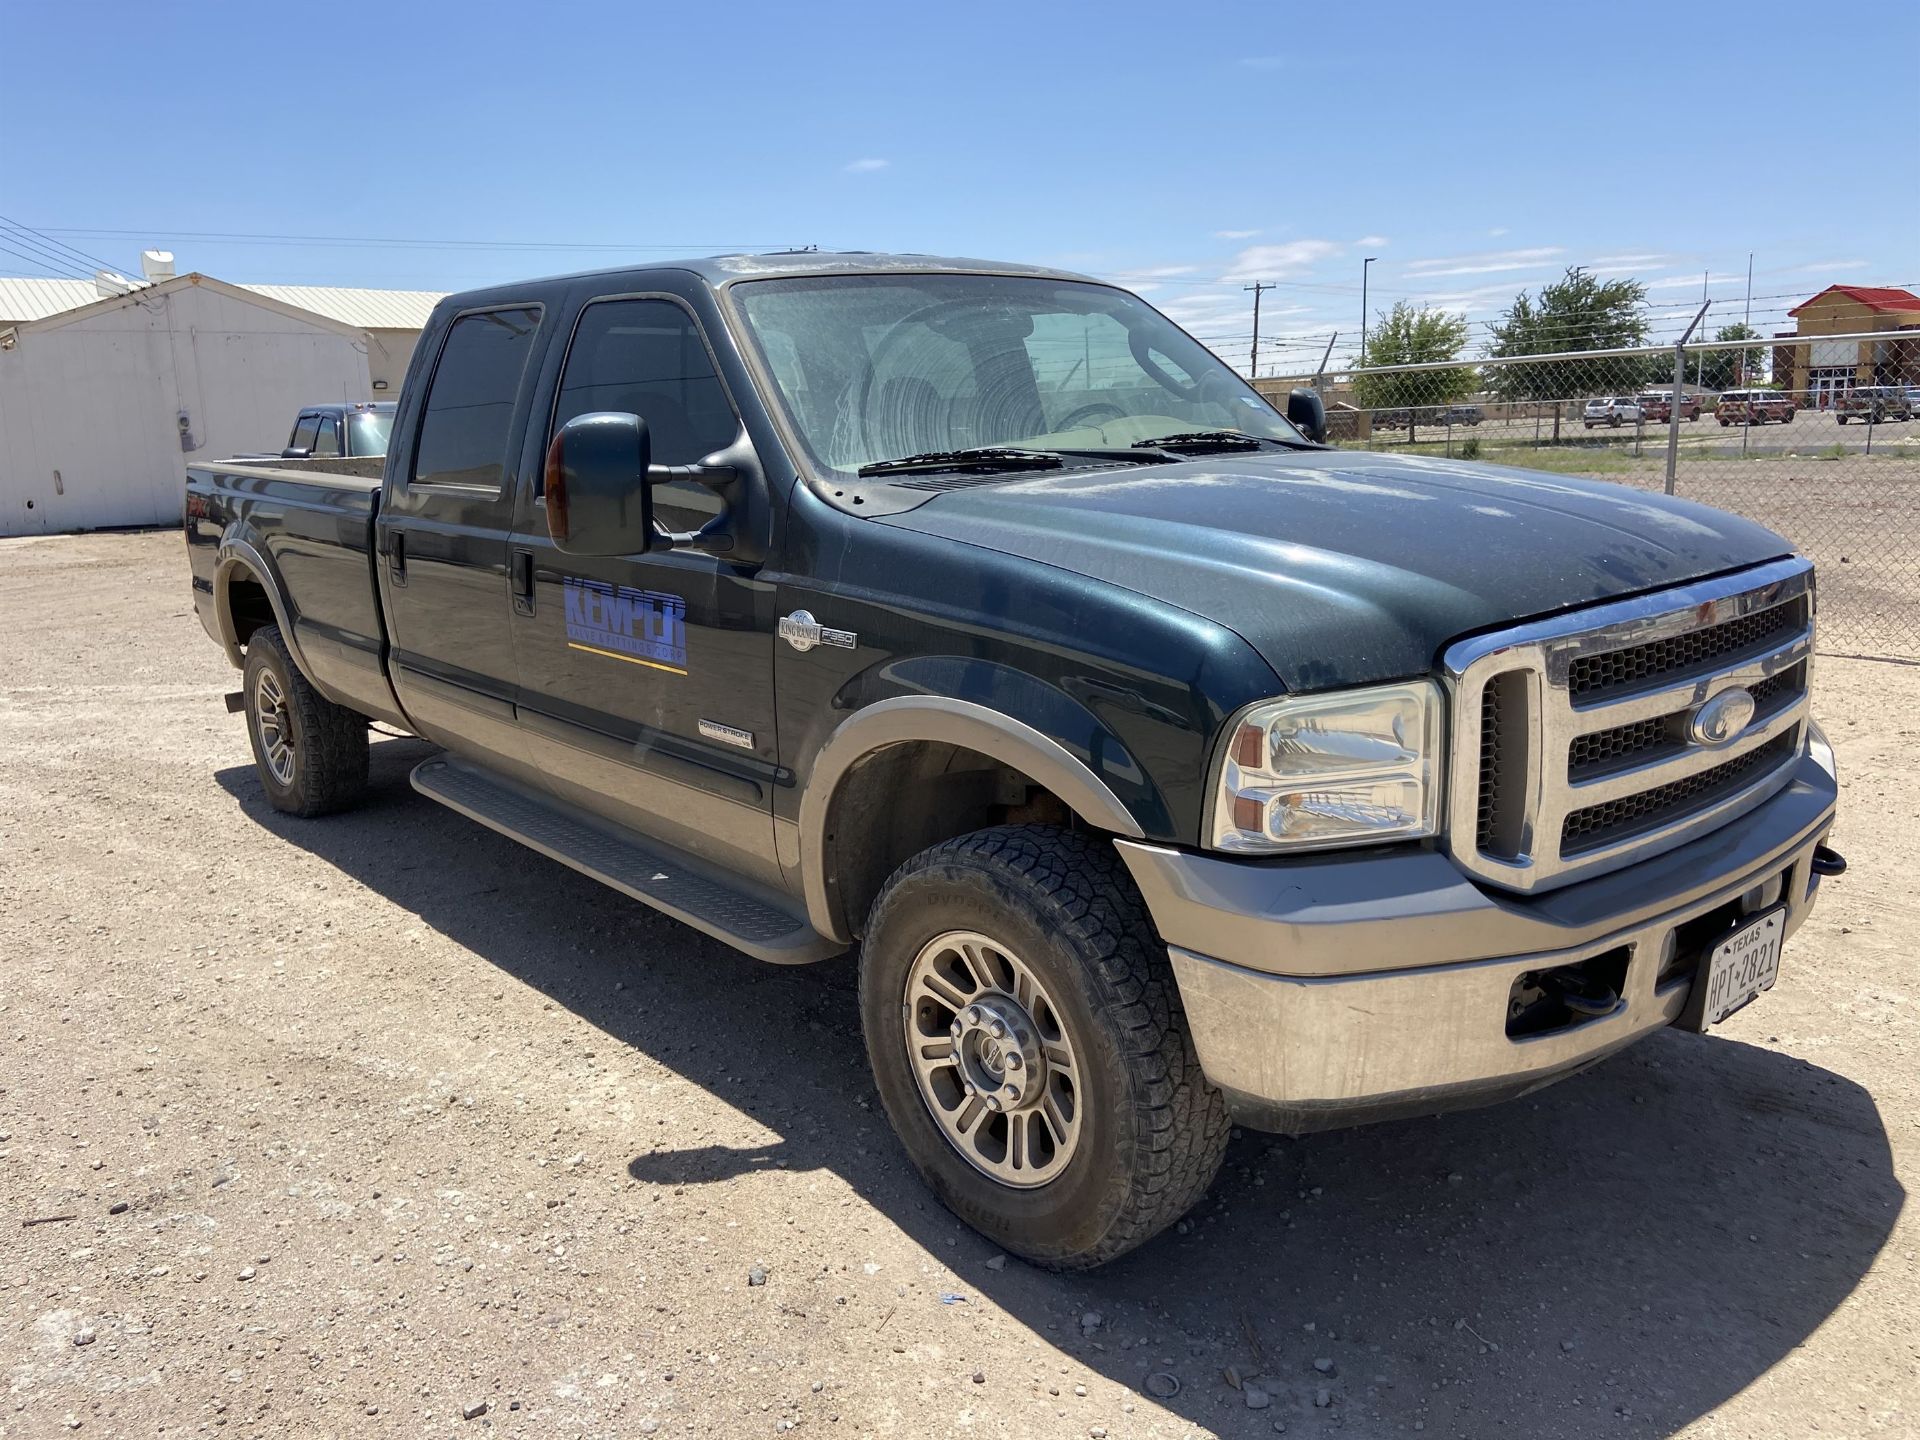 2005 Ford F350 King Ranch SRW 4x4 Crew Cab Long Bed, Leather, 295K Miles, VIN # 1FTWW31P15EC32199 - Image 2 of 17